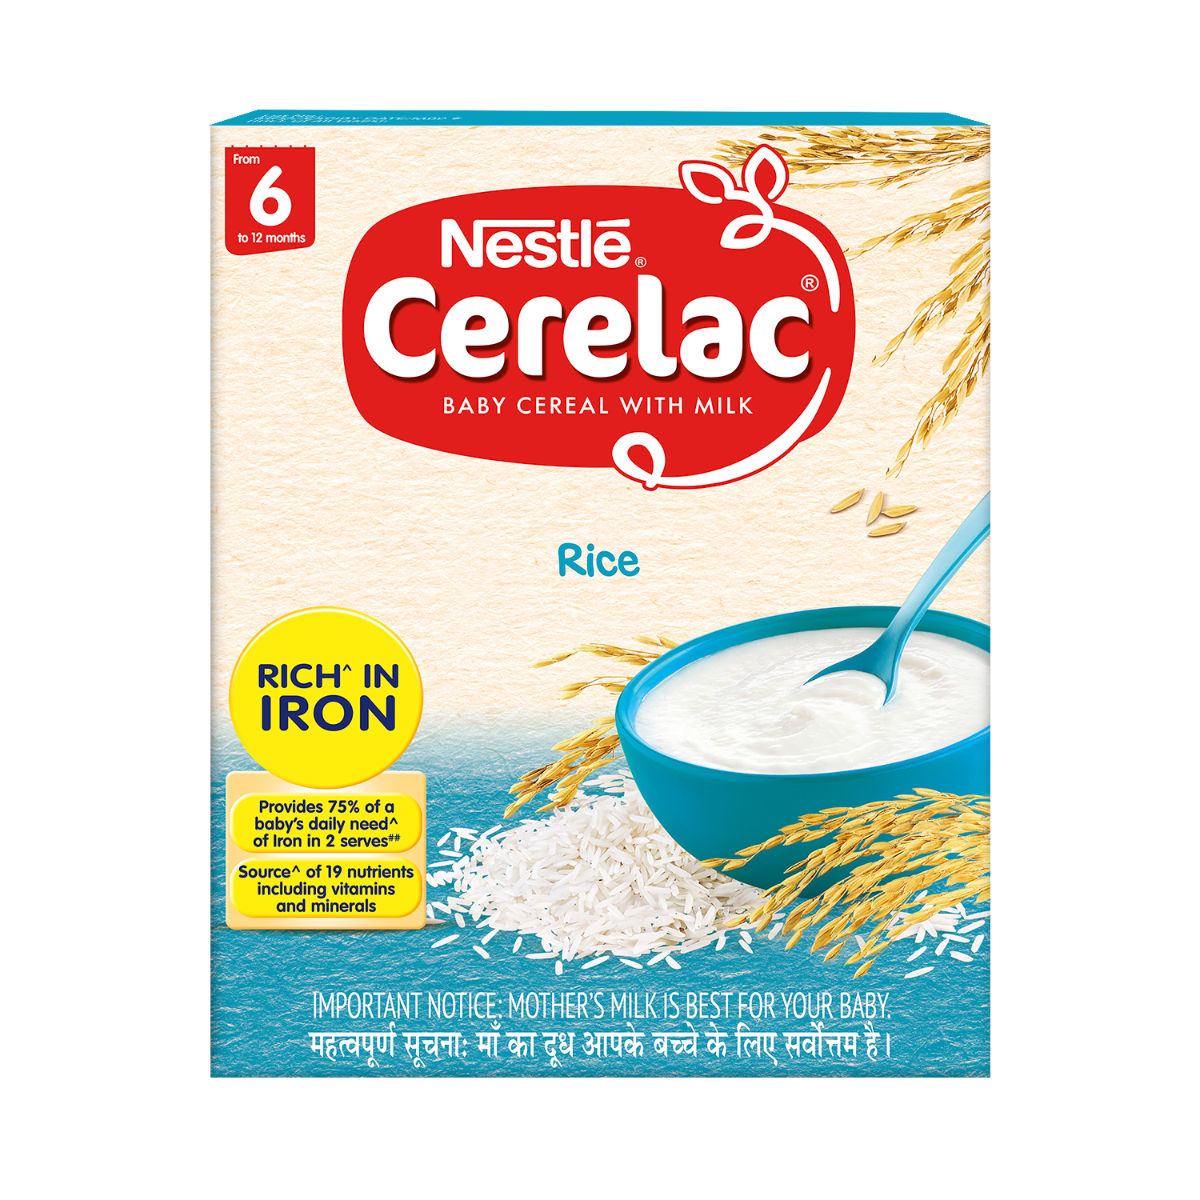 Buy Nestle Cerelac Baby Cereal with Milk Rice (From 6 to 12 Months) Powder, 300 gm Refill Pack Online